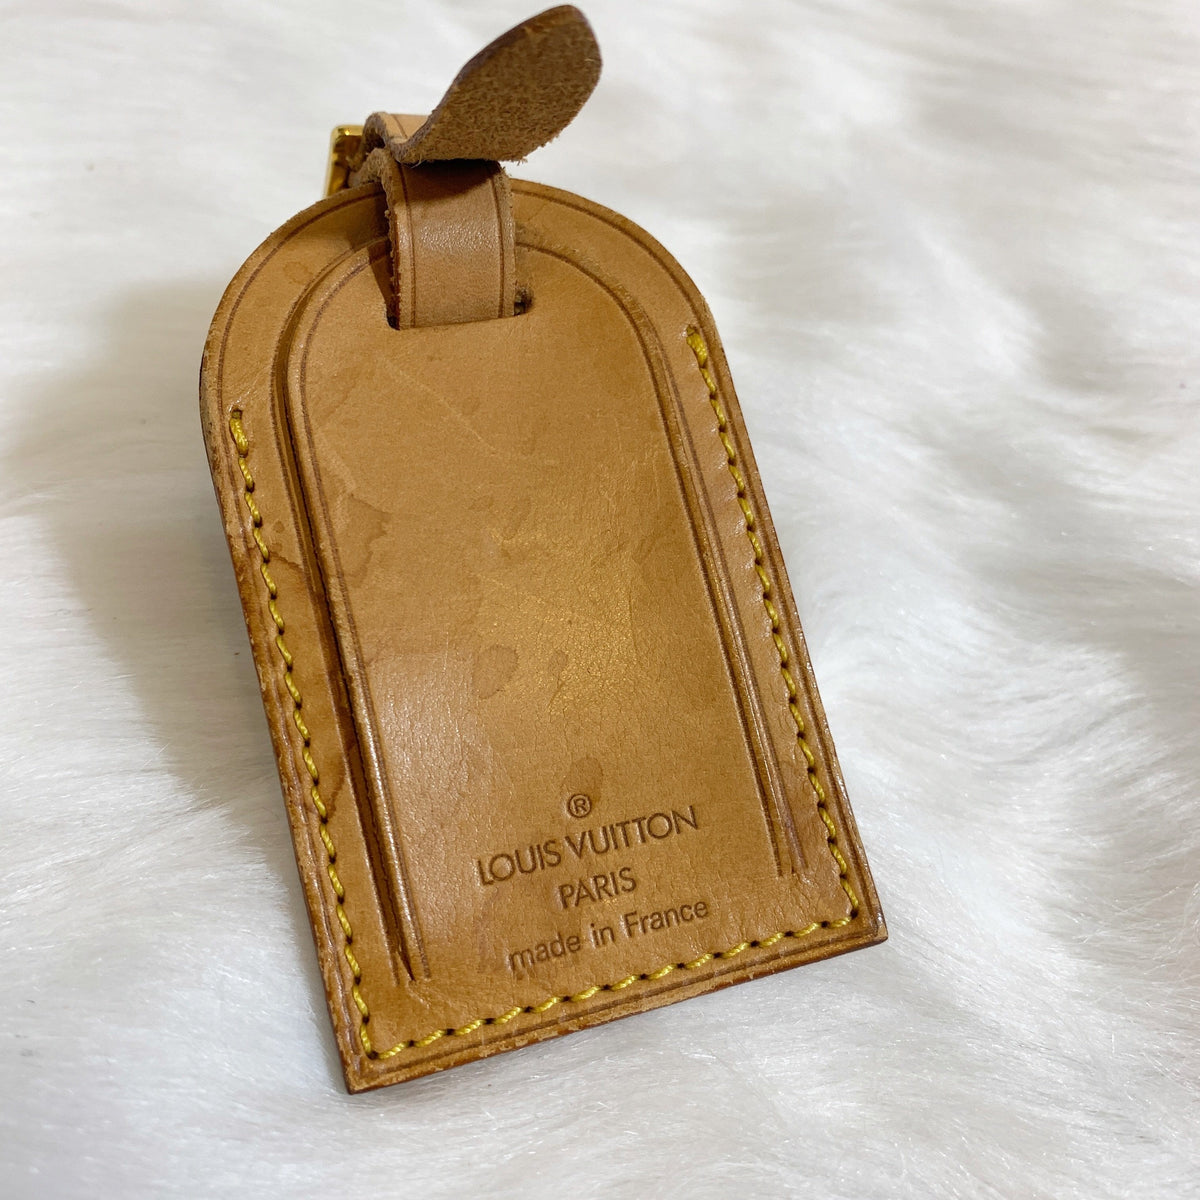 Authentic Louis Vuitton Large Name Tag Older- One pc.